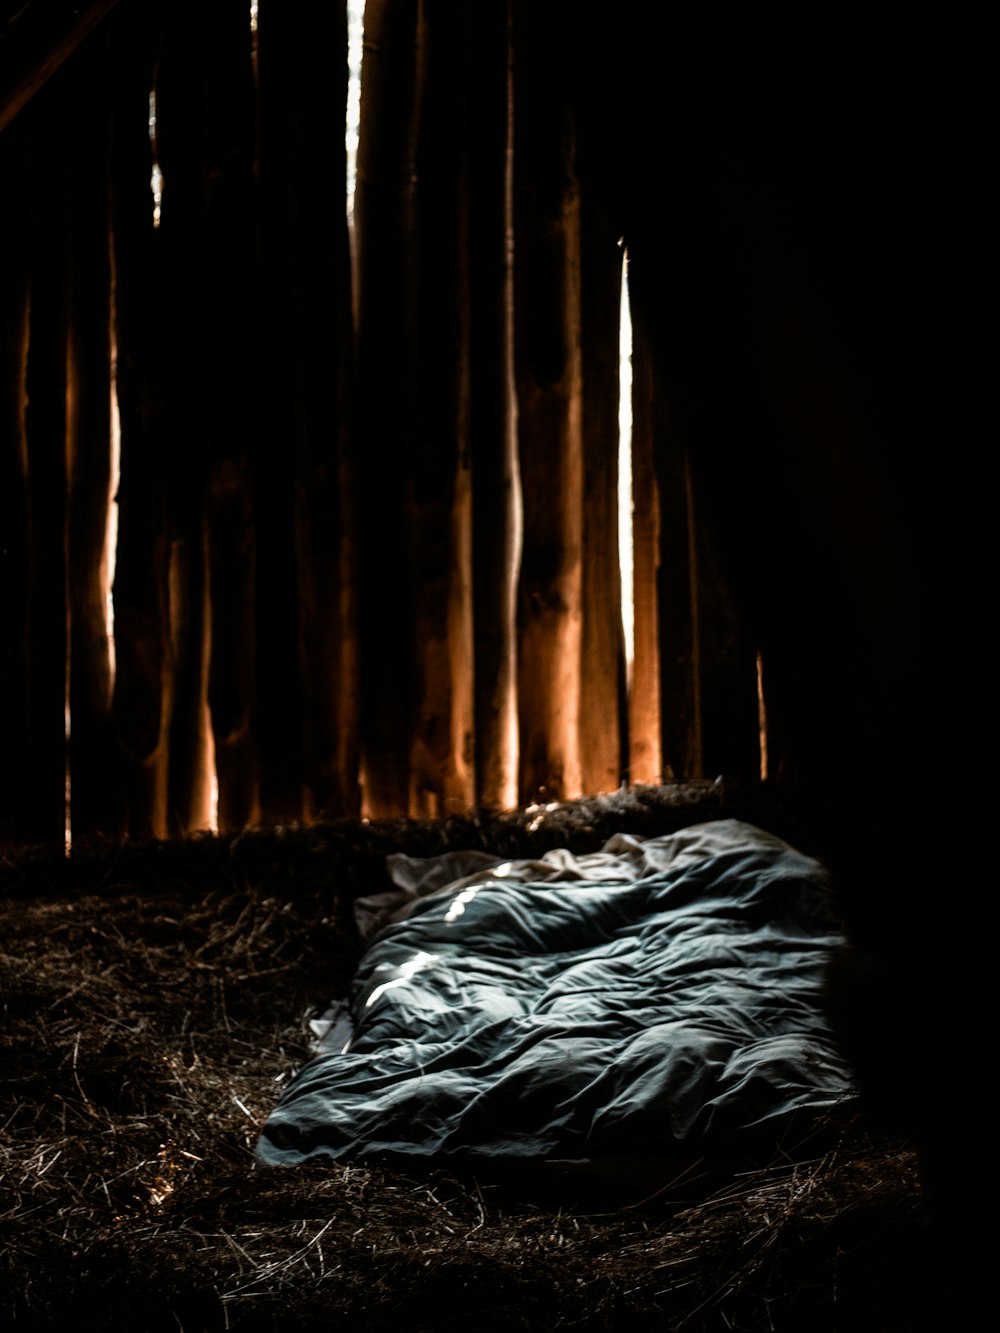 a sleeping bag in the dark of a bamboo forest